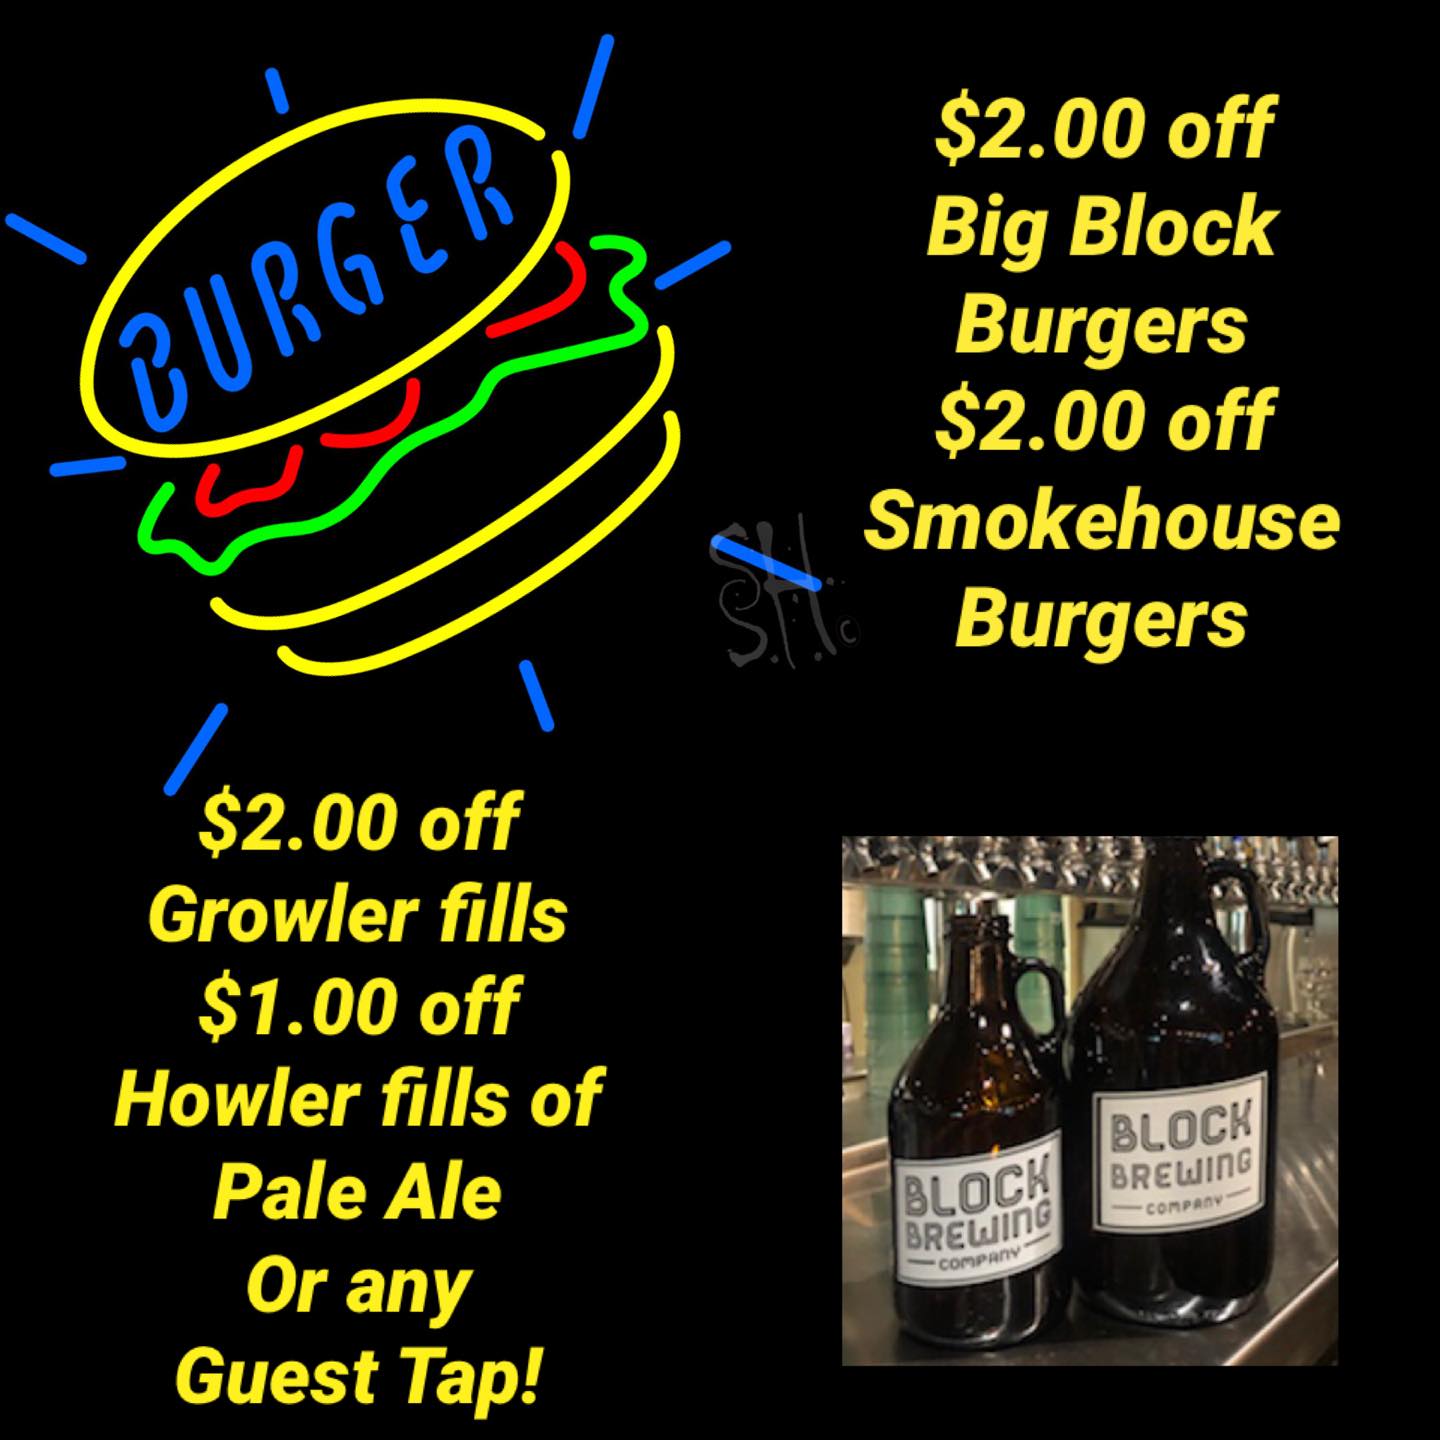 Today 12/9/20 we are featuring $ off Smokehouse and Big Block Burgers ad $…